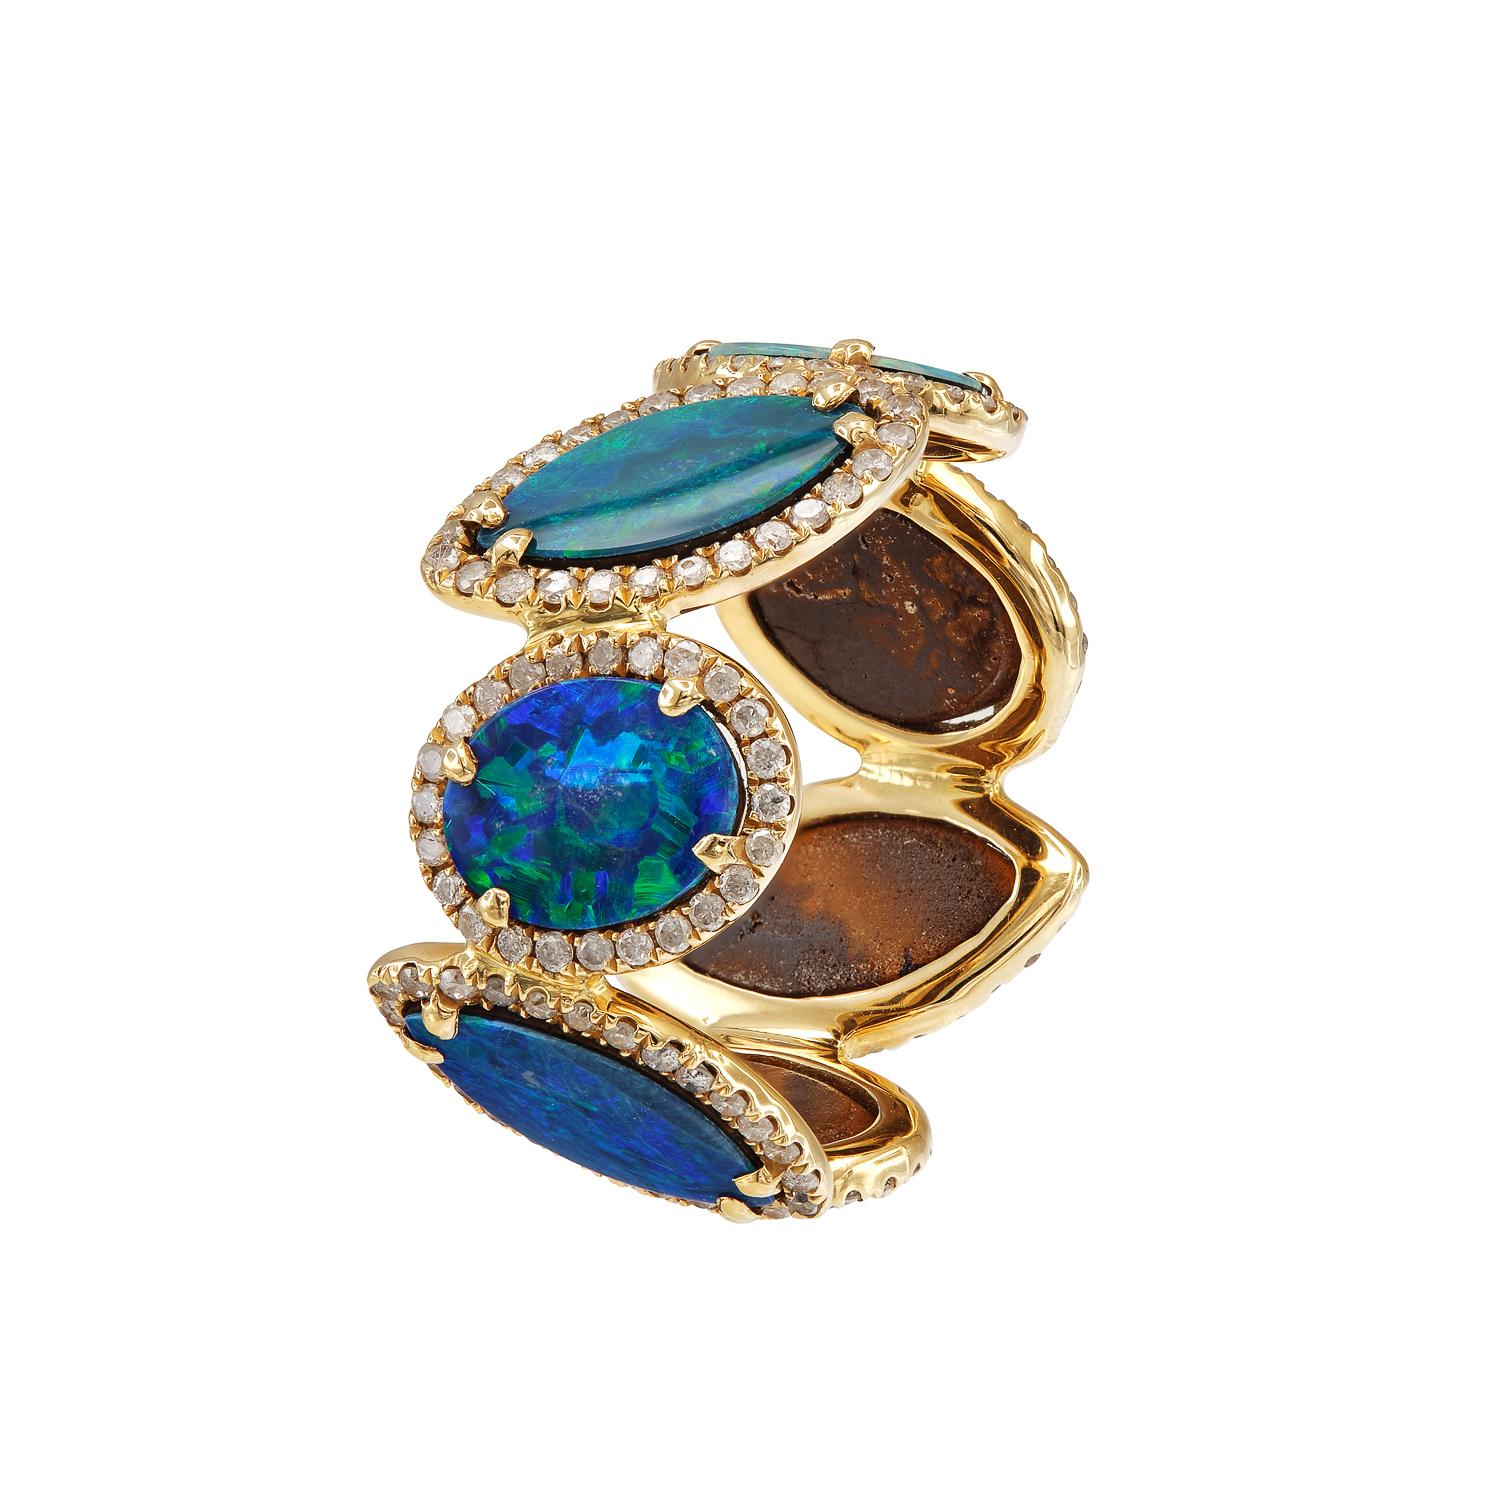 18K Yellow Gold
Opal: 5.01ct total weight.
Diamond: 0.72ct total weight.
All diamonds are G-H/SI stones.